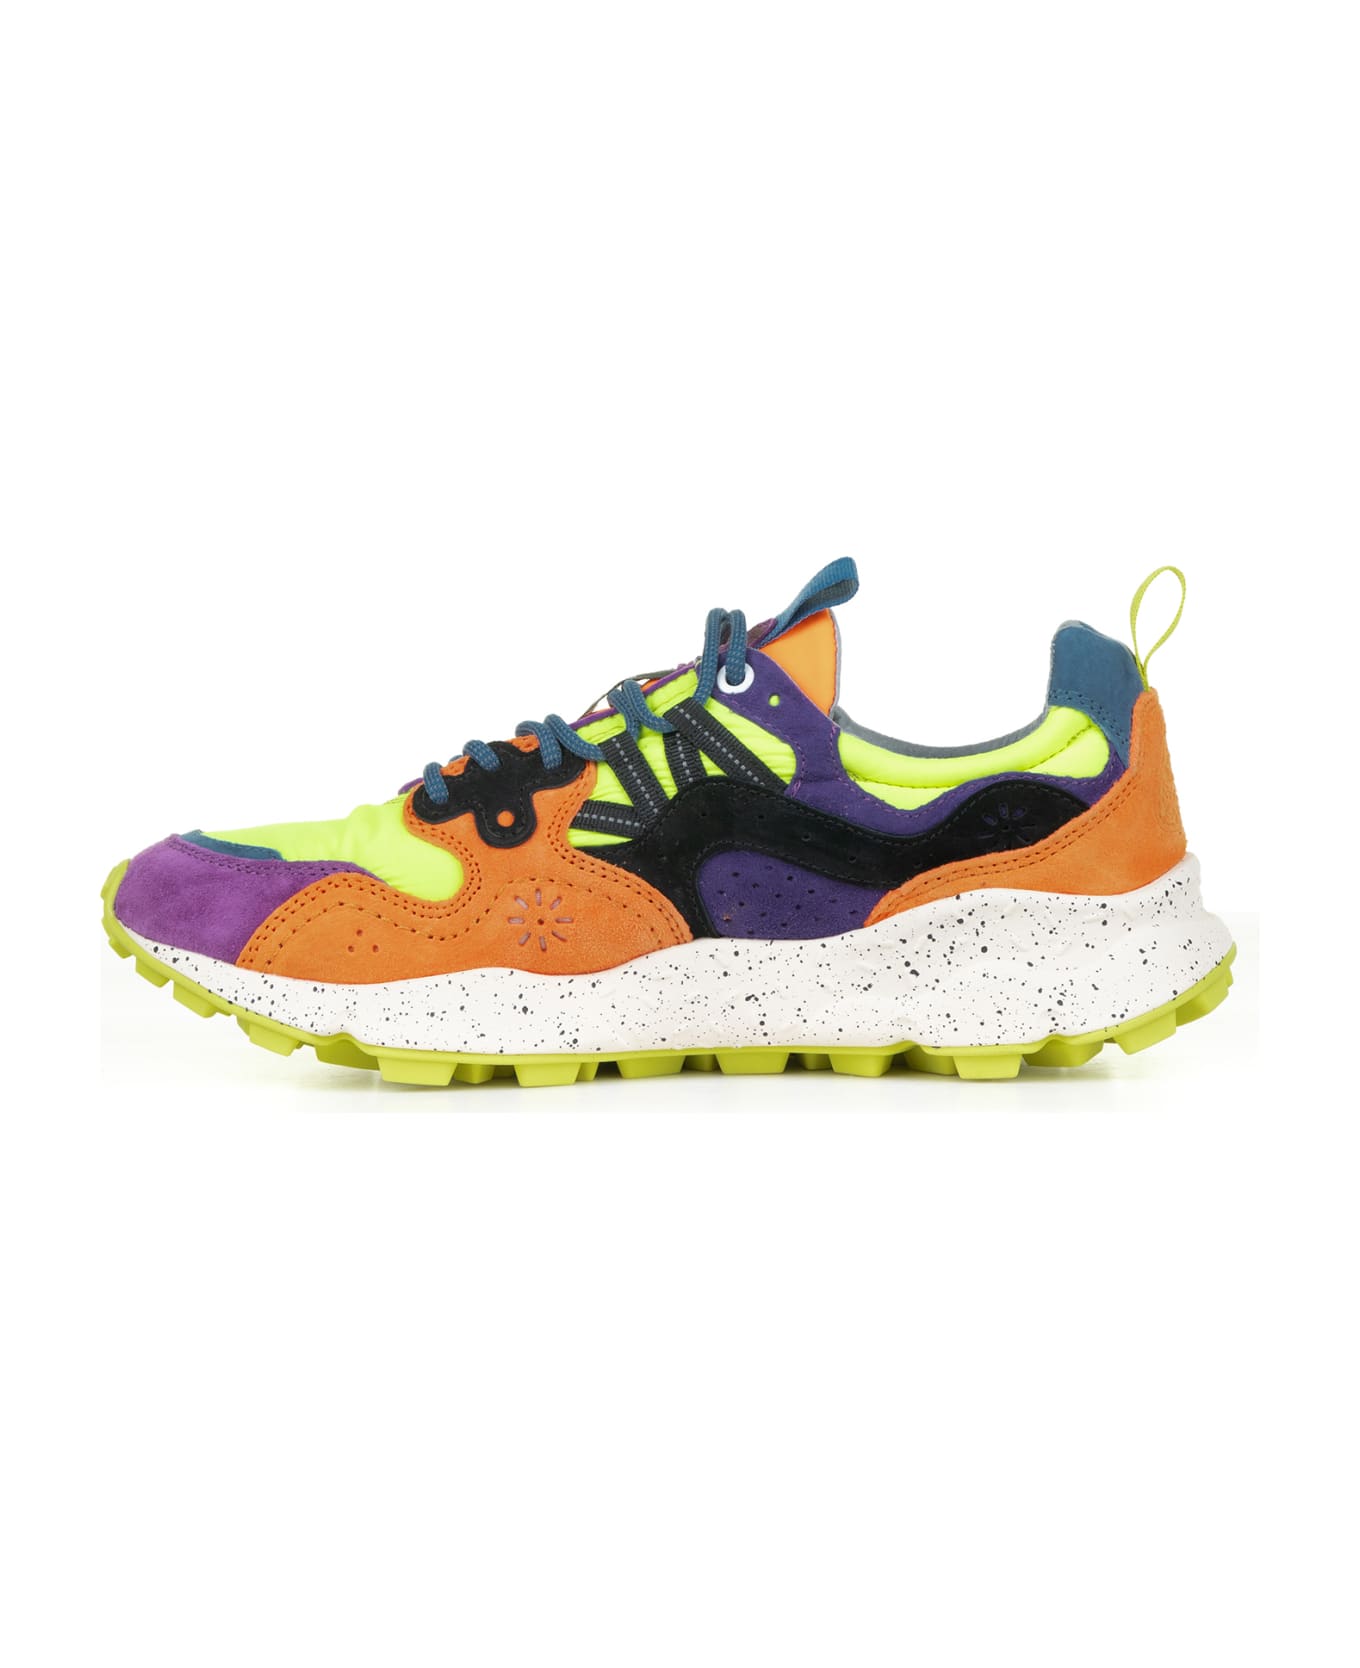 Flower Mountain Multicolored Yamano Sneakers - OCRA VIOLET